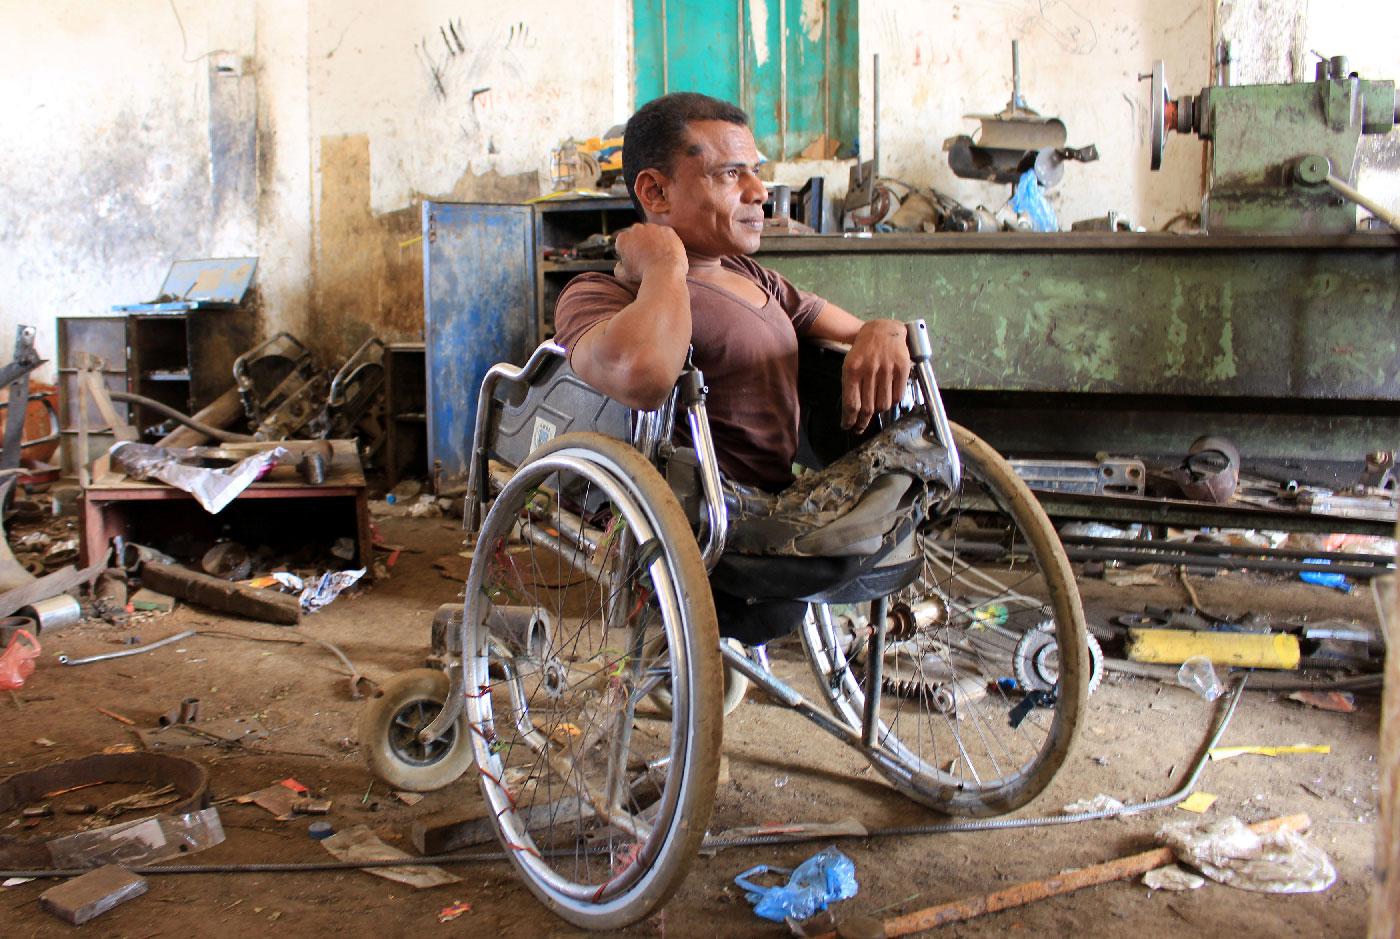 Yaarub Eissa sits in his wheelchair at a blacksmith workshop where he works in Abs, in the northern province of Hajjah, Yemen January 19, 2019.